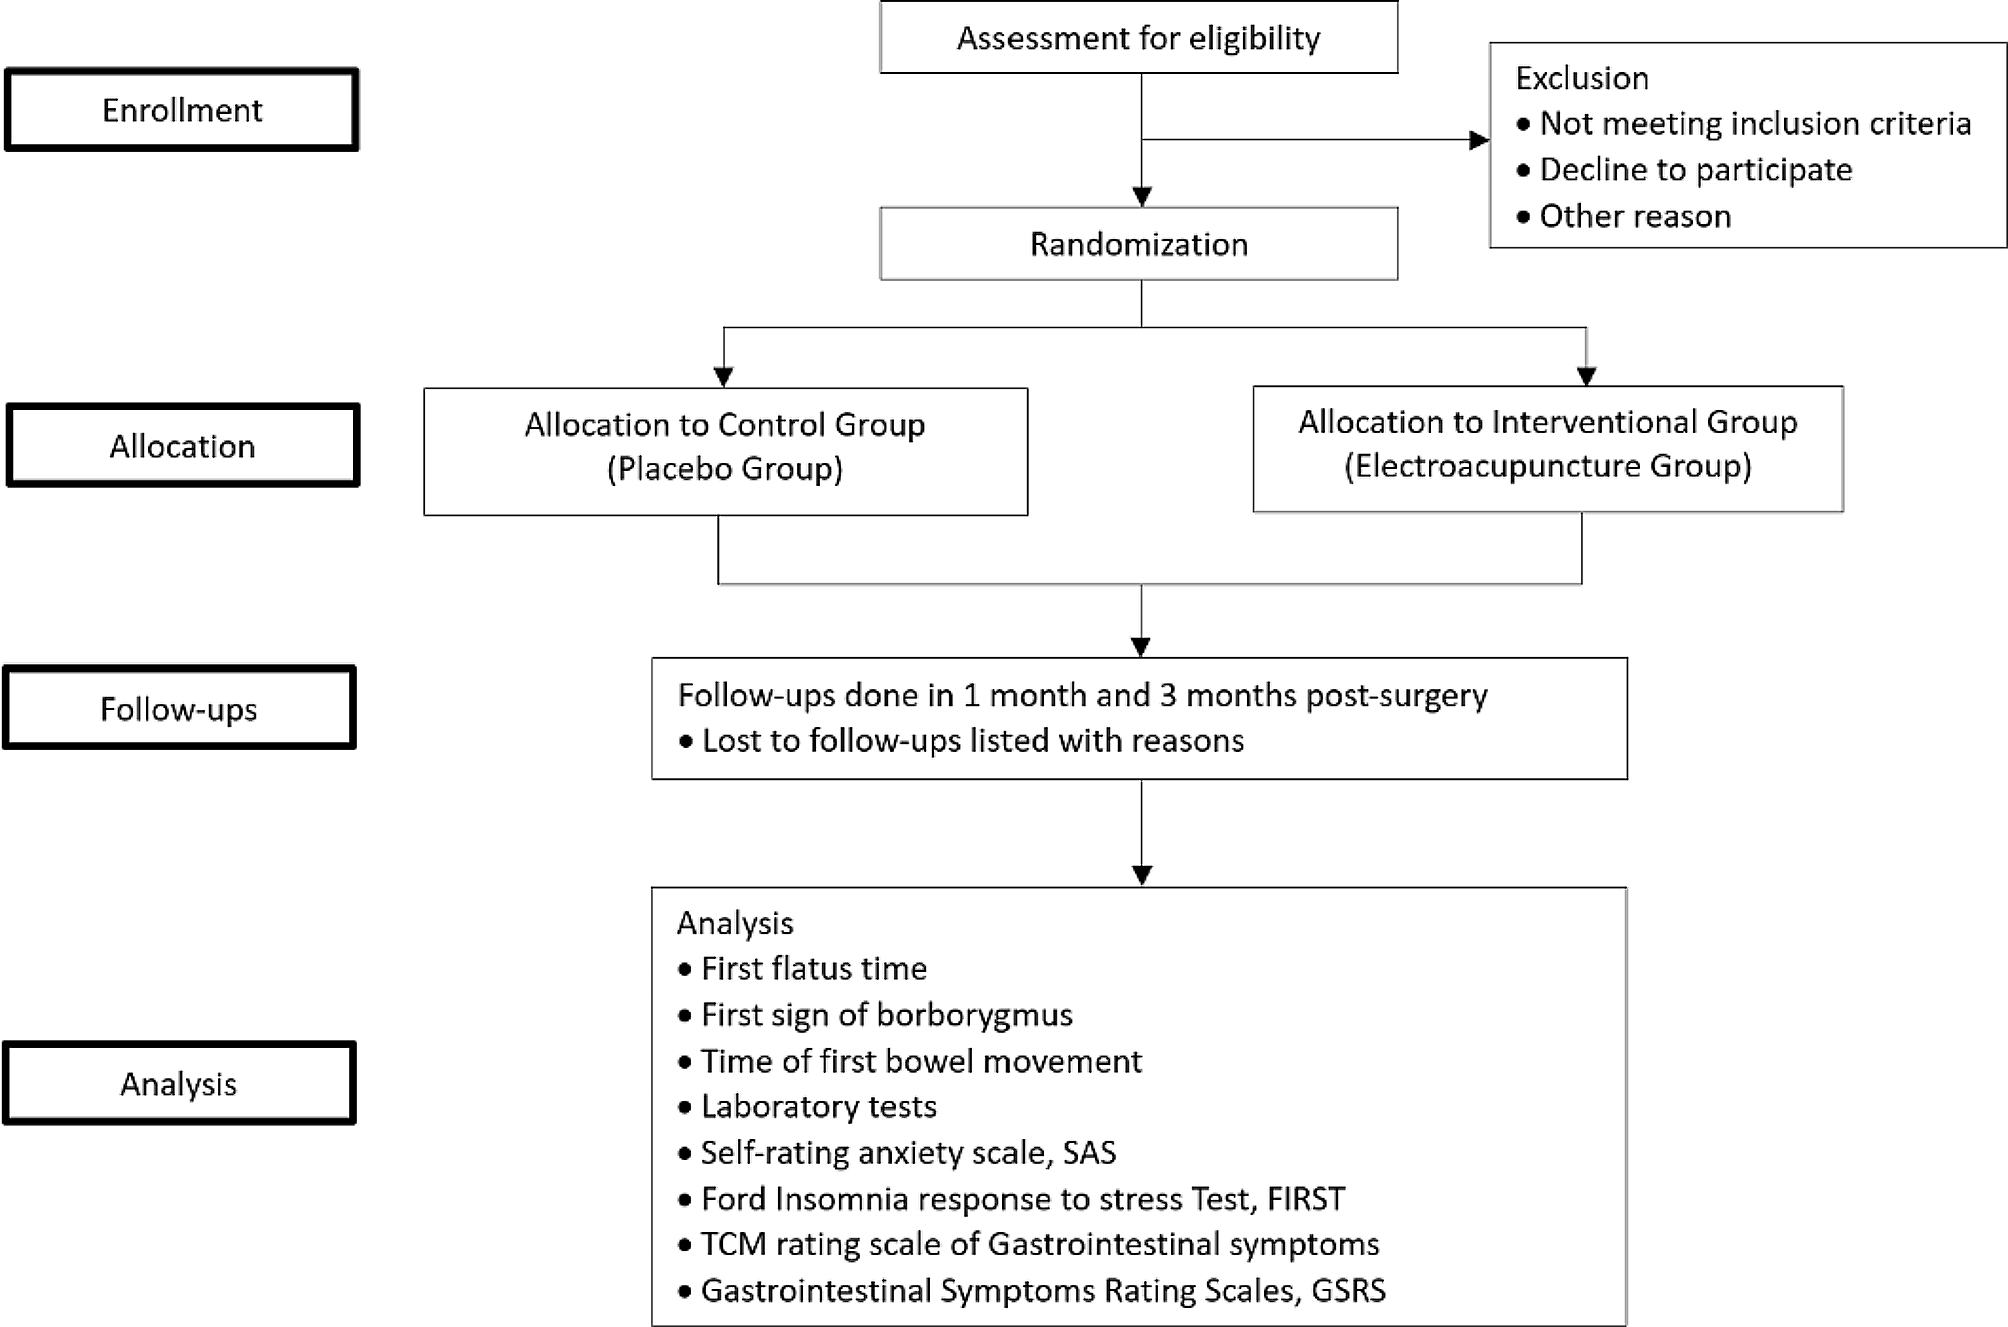 Clinical study of electroacupuncture on the recovery of gastrointestinal dysfunction after laparoscopic surgery for gastrointestinal cancer - study protocol for a randomized controlled trial